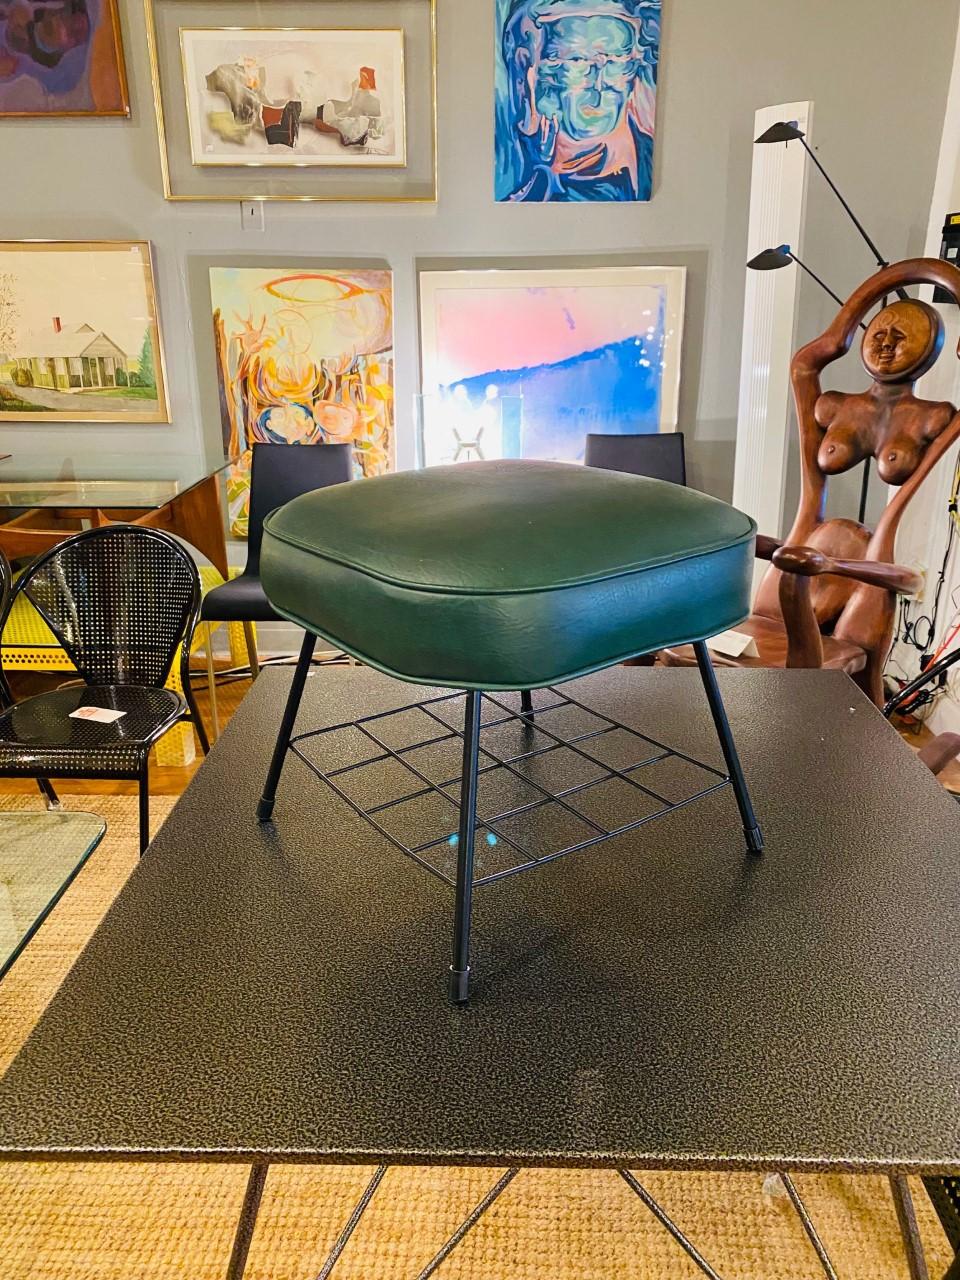 Incredible piece of atomic midcentury design. This beautiful foot stool represents the iconic atomic design of the 1960s. A pleather resting base in a beautiful green shade is balanced over streamlined legs. Mid Century and Atomic in style but oh so